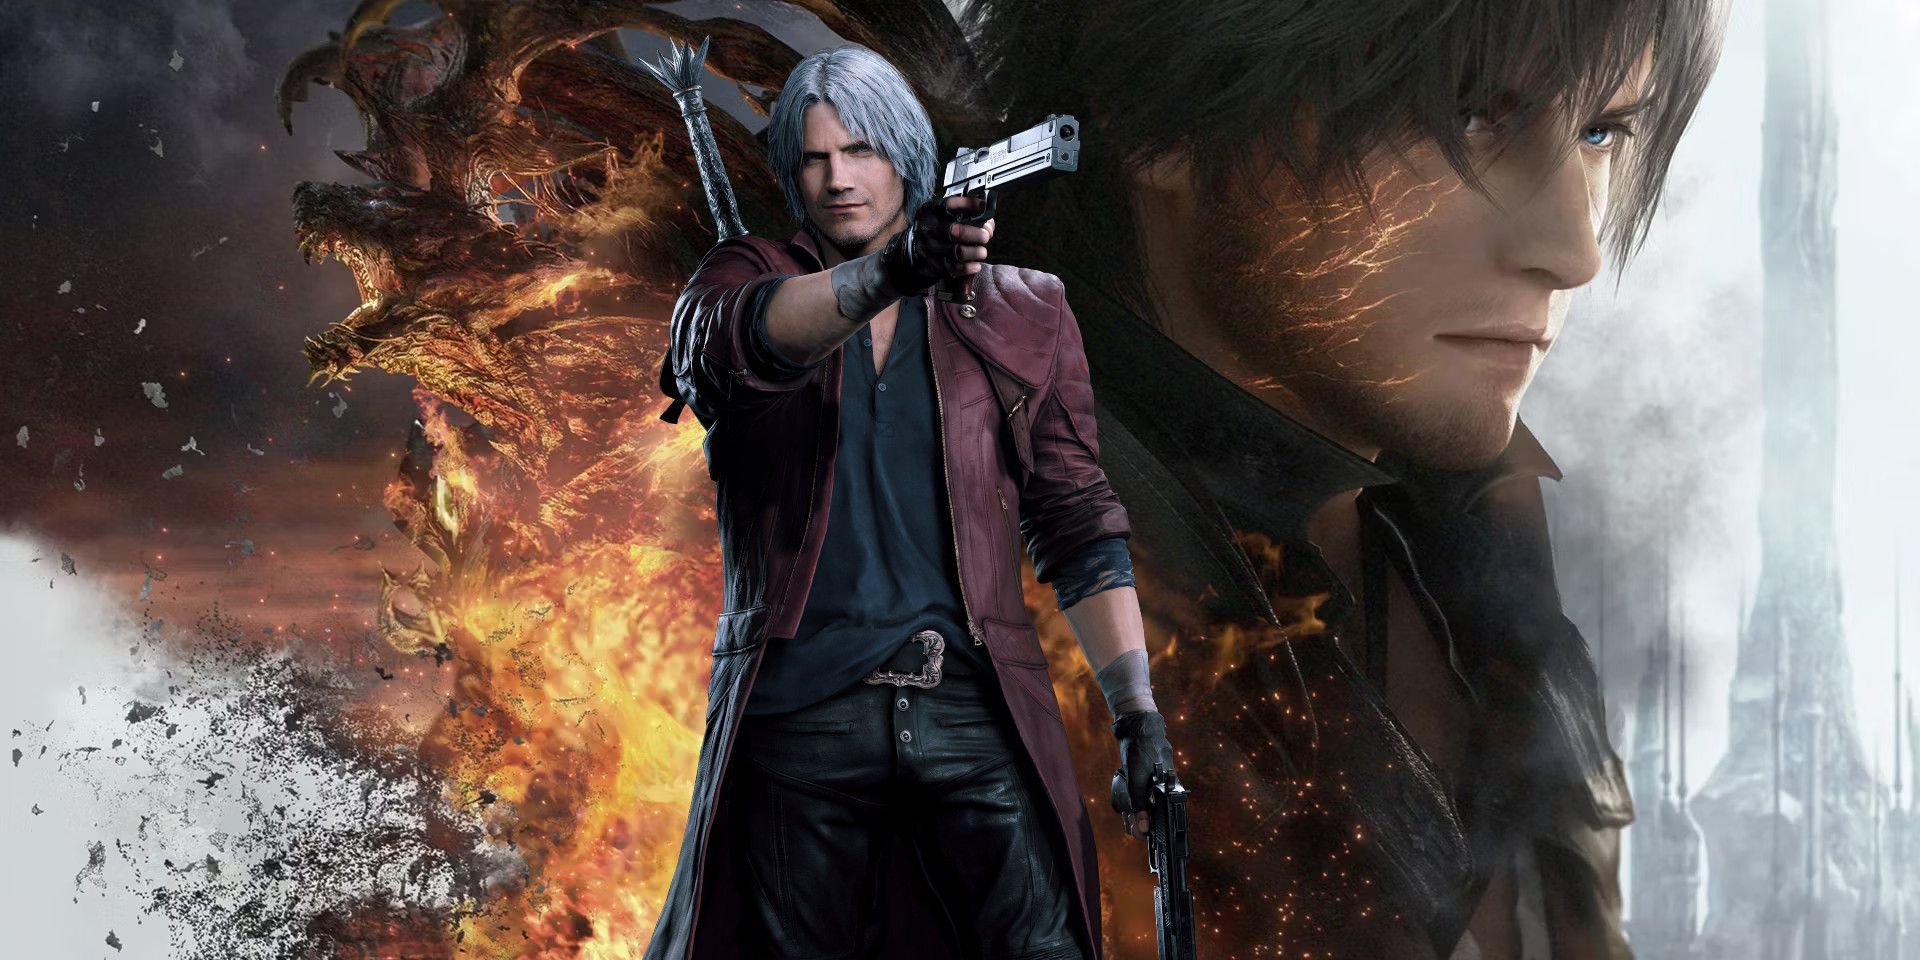 Dante from Devil May Cry 5 overlaid on key art for Final Fantasy 16.